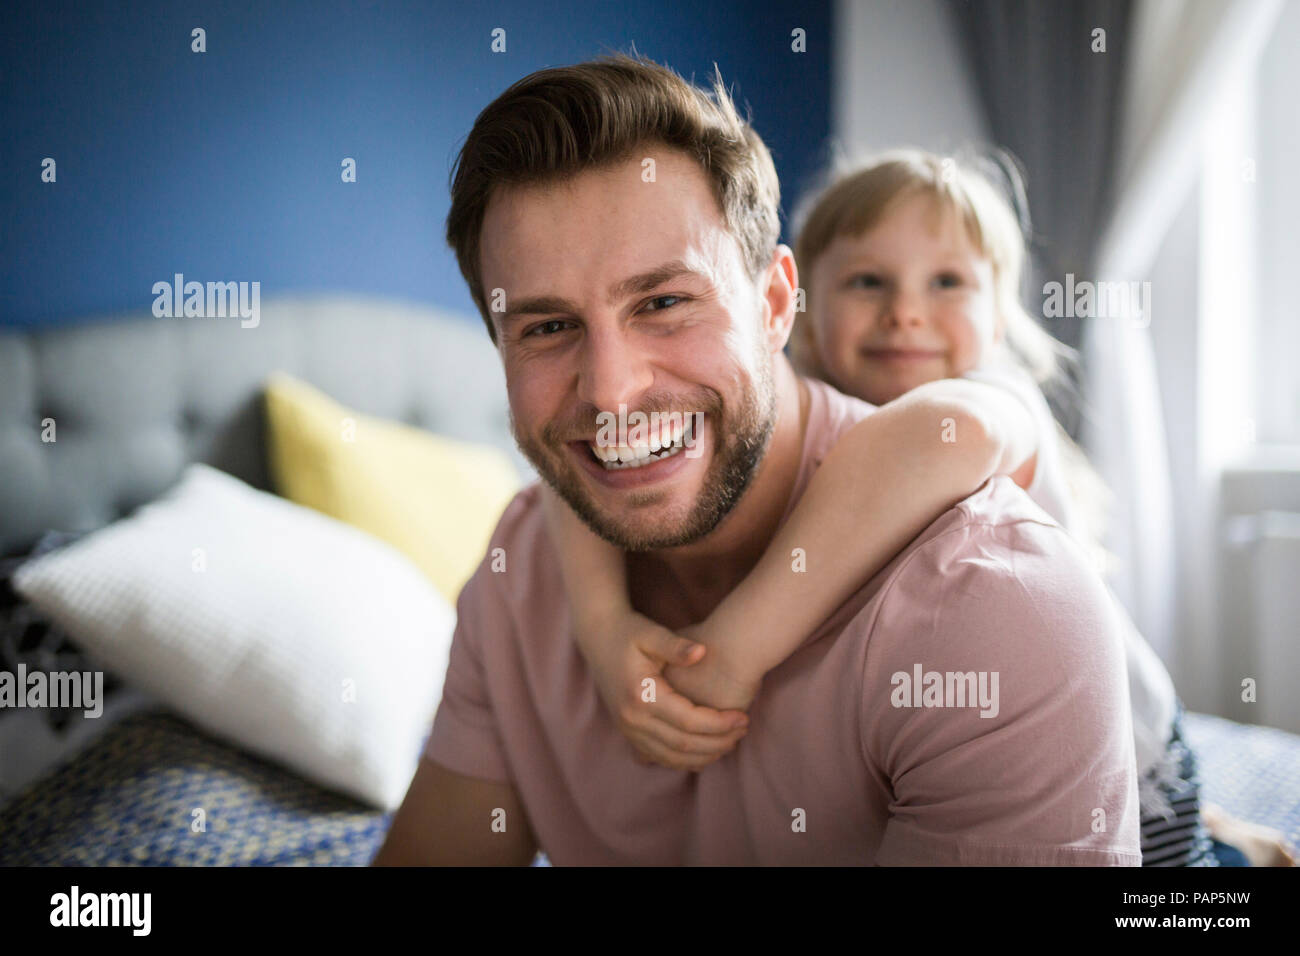 Happy father and daughter sitting on bed, embracing Stock Photo